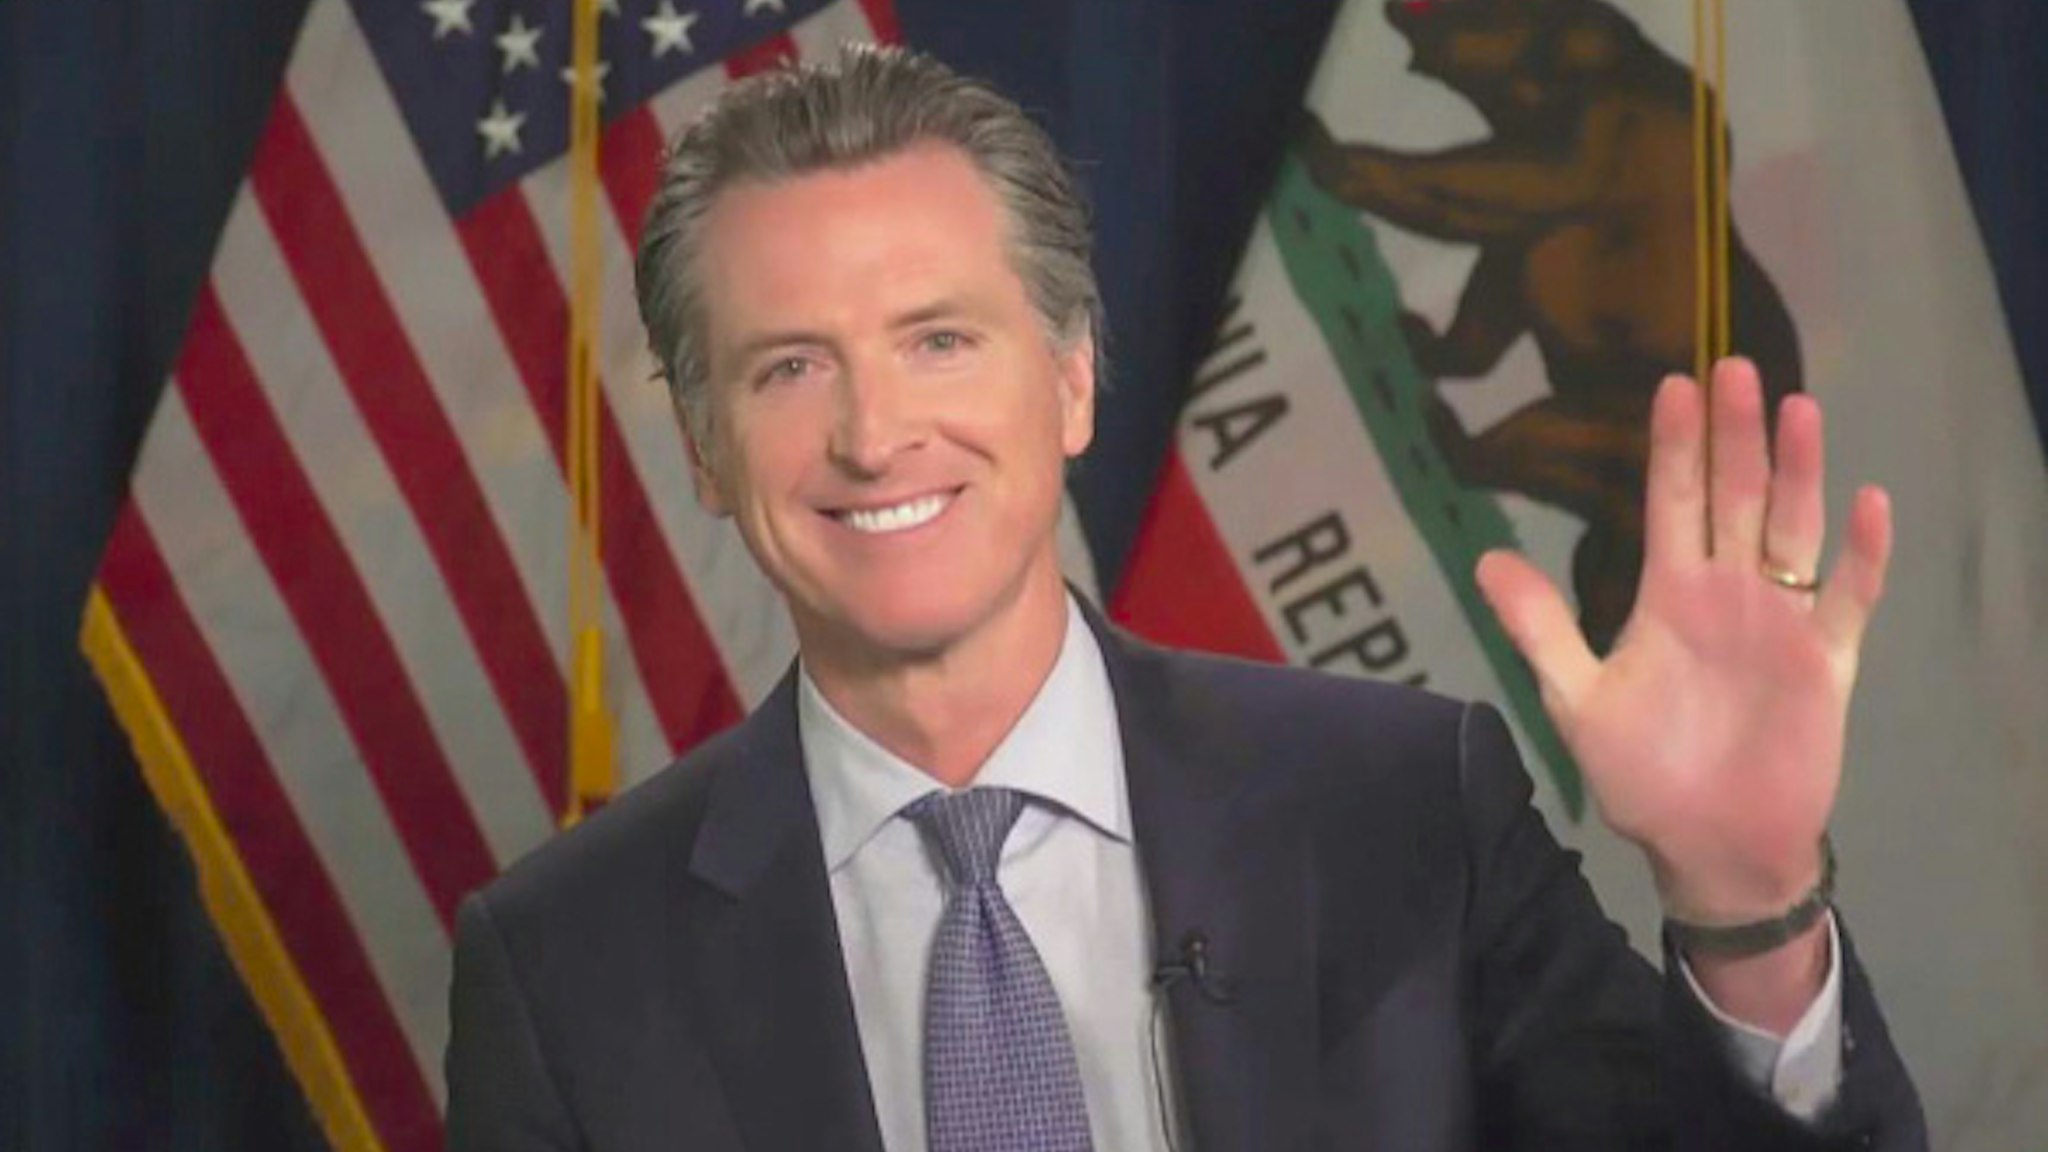 LOS ANGELES - JUNE 17: James chats with California Governor Gavin Newsom from his garage on THE LATE LATE SHOW WITH JAMES CORDEN, scheduled to air Wednesday June 17, 2020 (12:37-1:37 AM, ET/PT) on the CBS Television Network. Image is a screen grab.